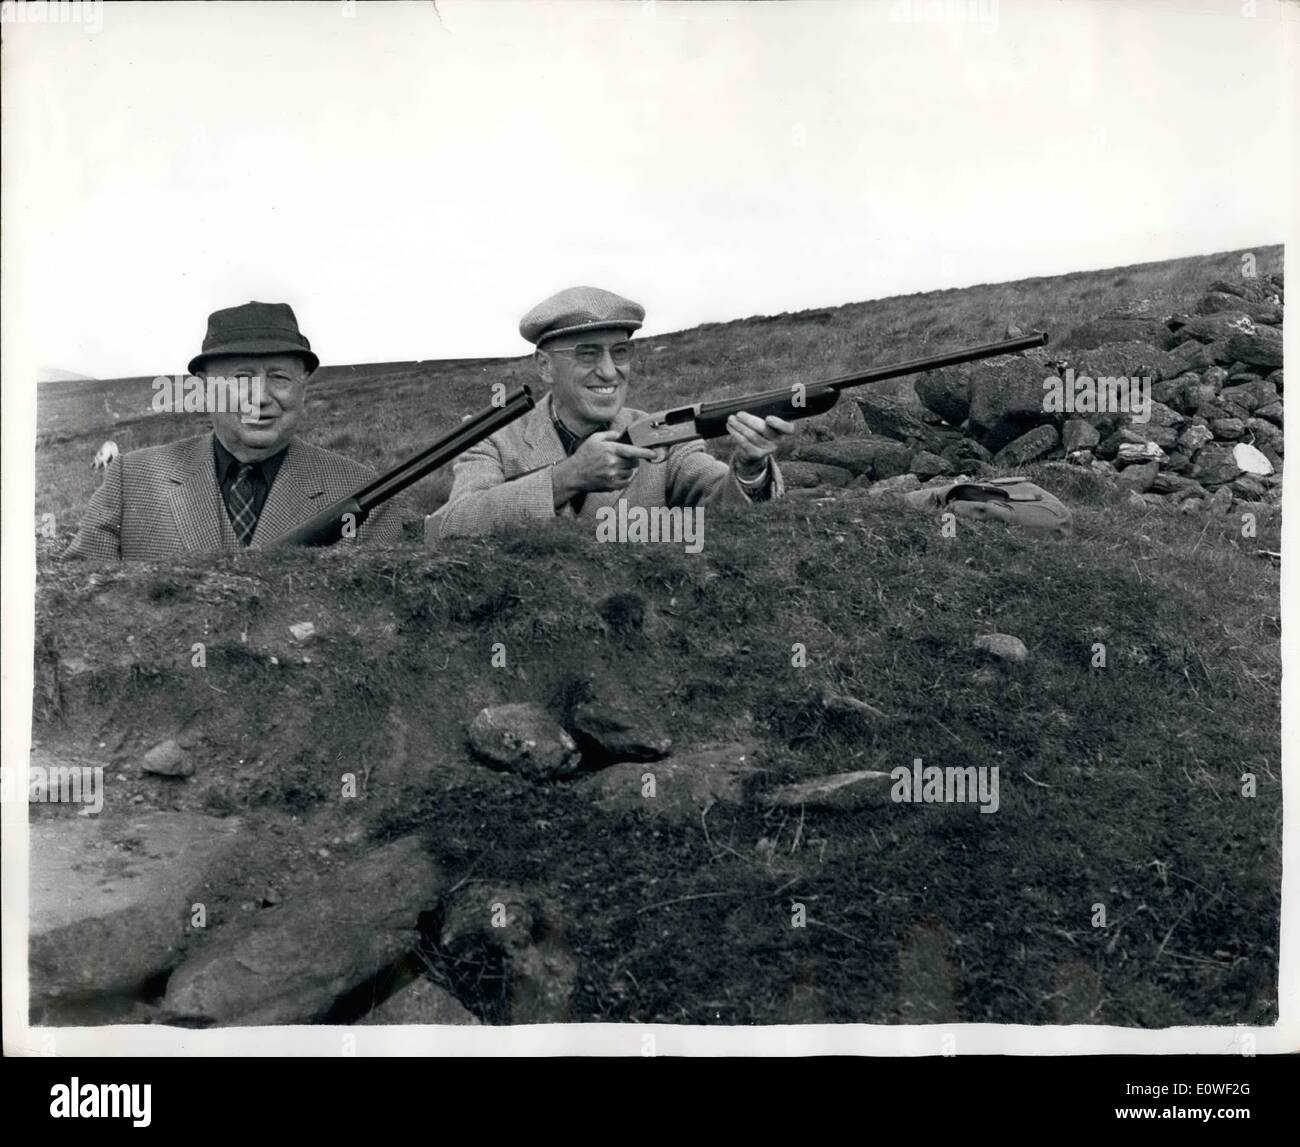 Aug. 08, 1962 - Americans go a-grousing: Yesterday was the start of the Grouse Shooting season. On the Perthshire moors, the National Cash Register Company of America held their shoot. Nine were guests of President, Mr.S.C.Allyen. Photo shows the butts:Mr. Allyen (left) and Mr.T.E.Sunderland of the United Fruit Company of America. Stock Photo